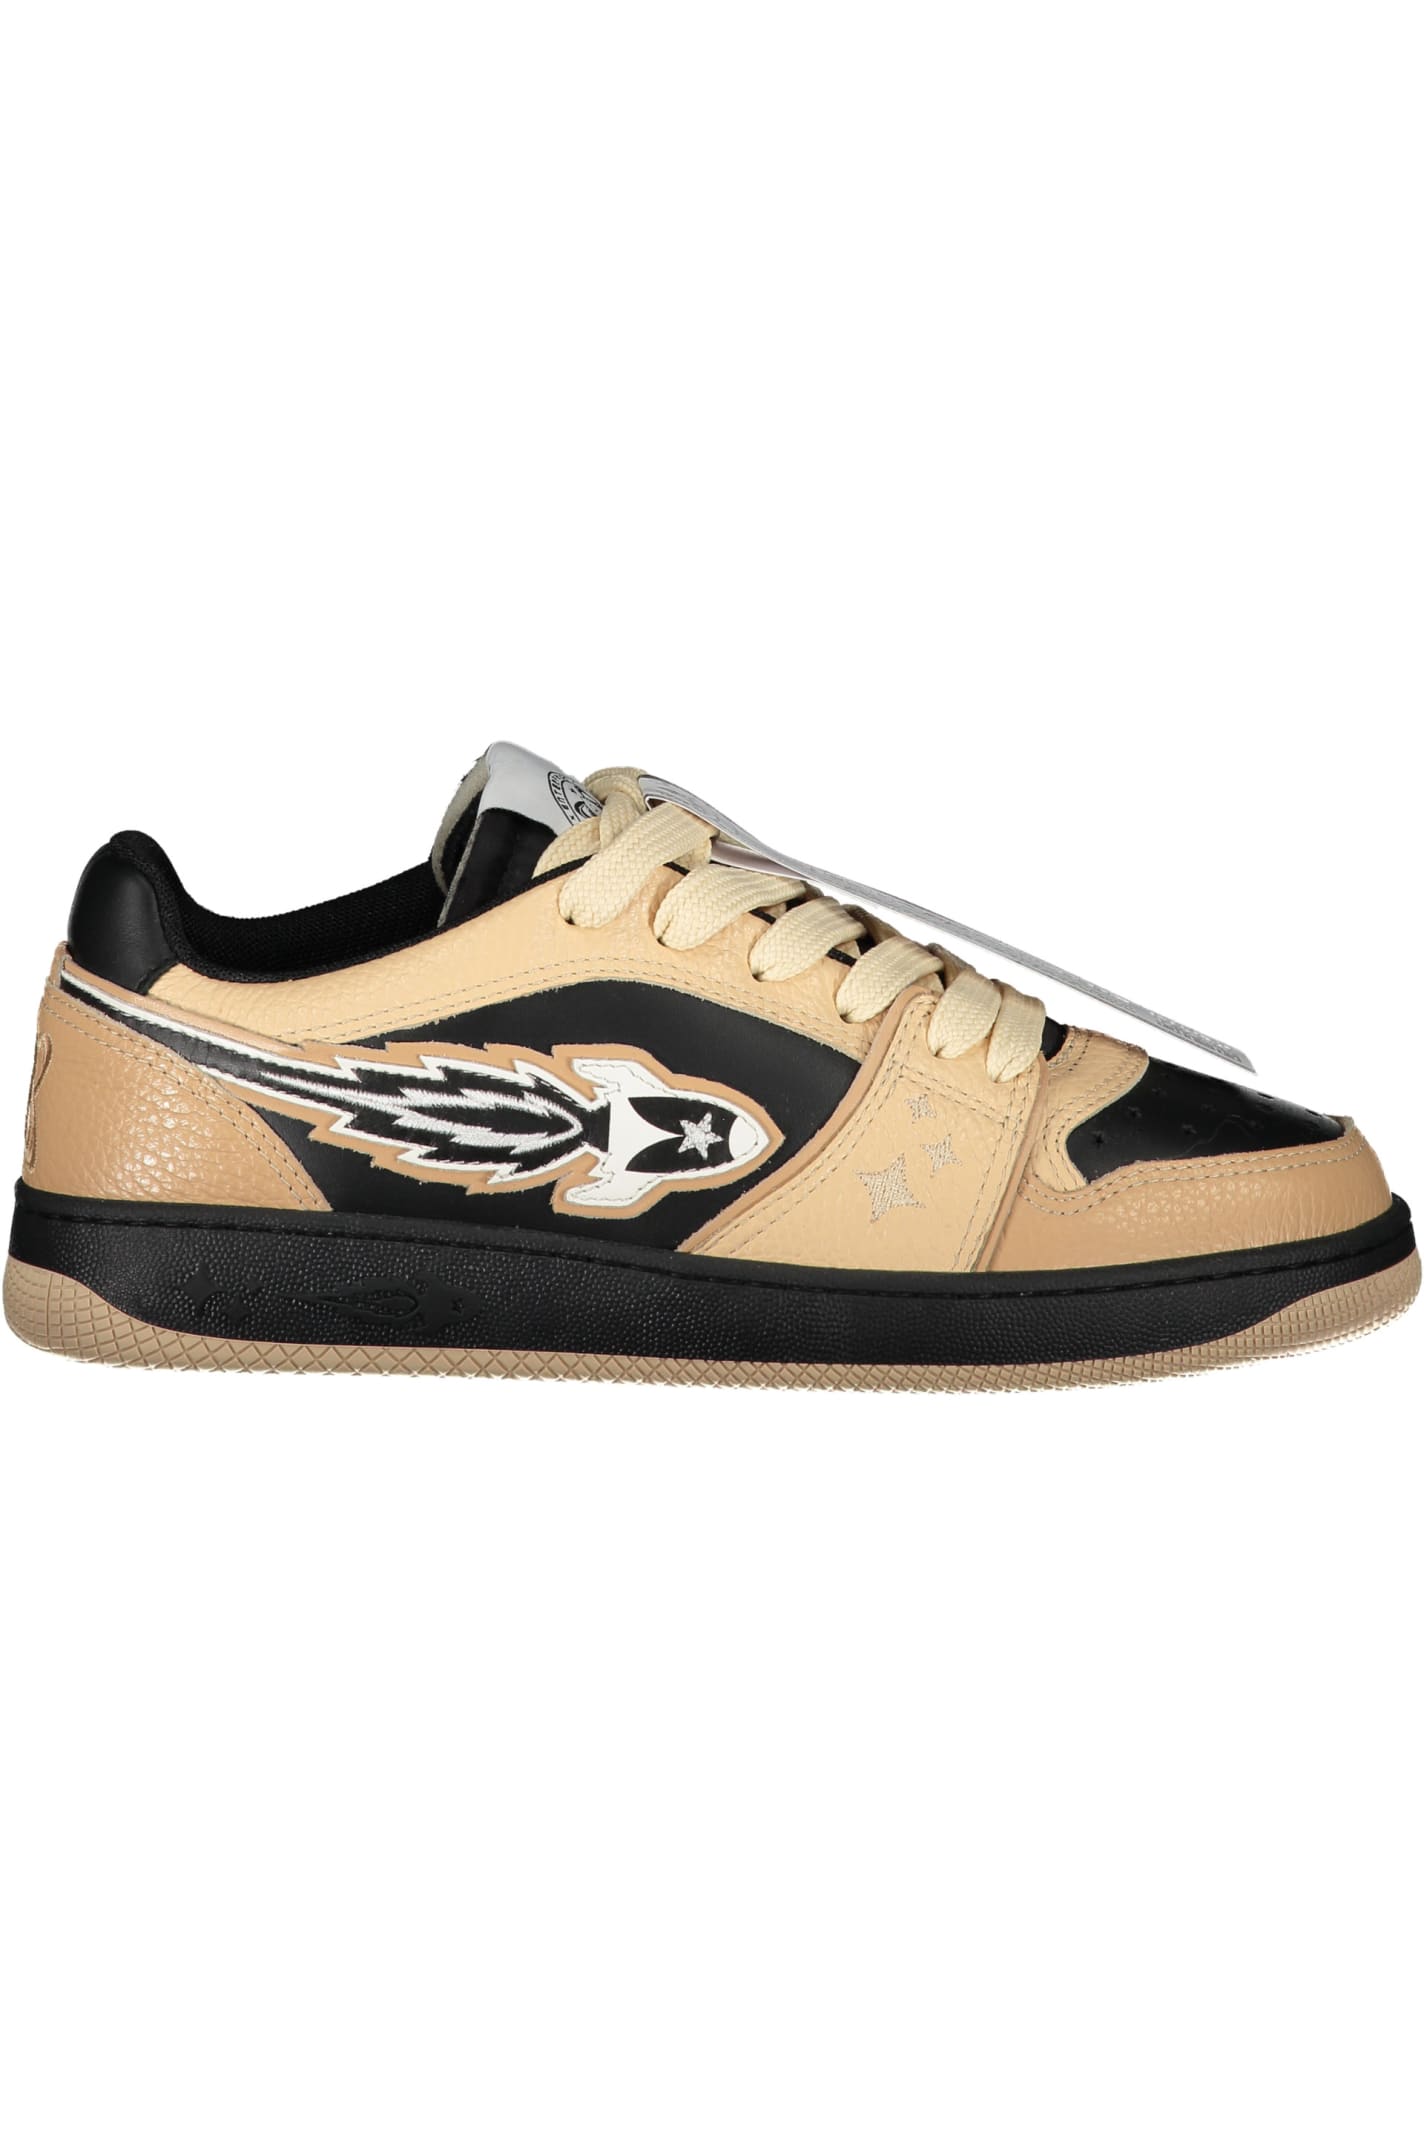 Enterprise Japan Leather Trainers In Sand